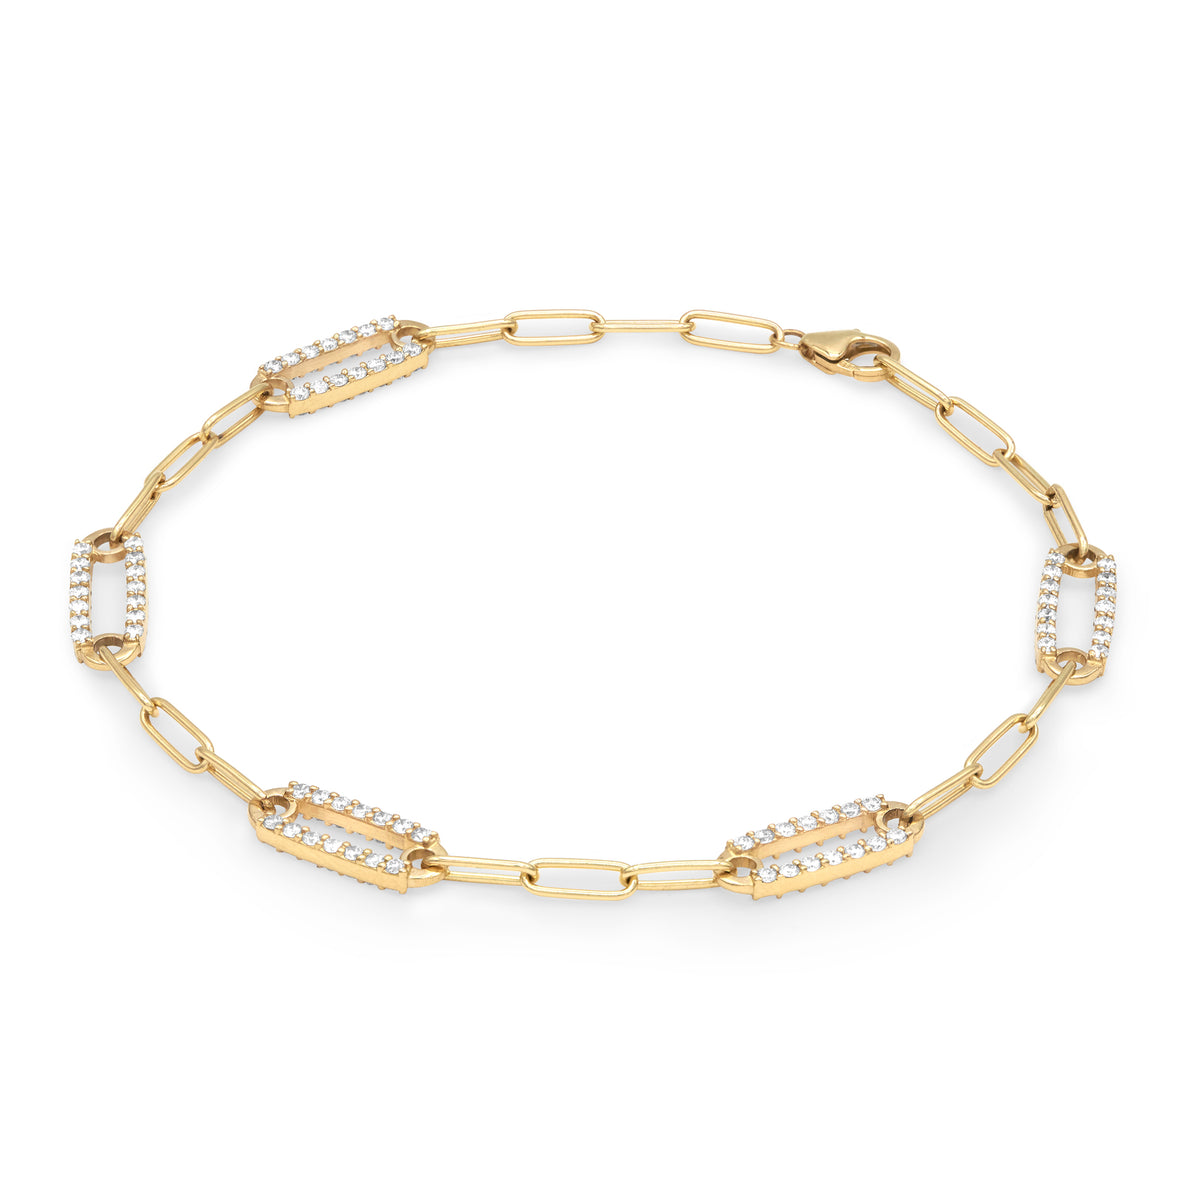 Tiffanyism Double Layer Diamond Enrusted Rope Knot Malabar Gold Bracelet  Designs Designer Jewelry For Women From Adornease, $12.83 | DHgate.Com